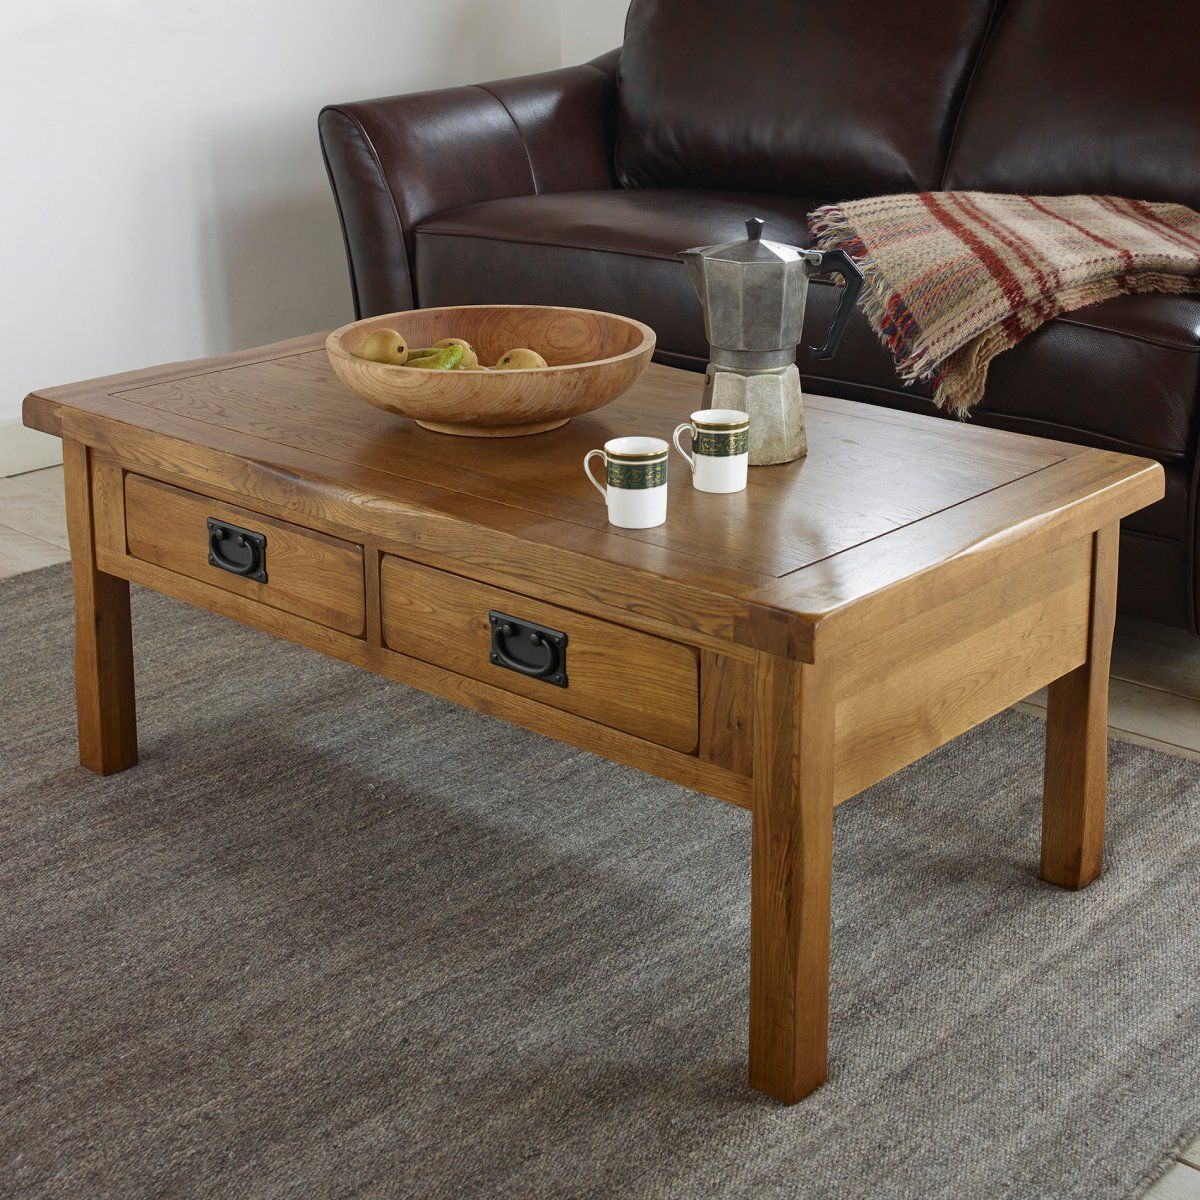 Original Rustic 4 Drawer Coffee Table In Solid Oak Intended For Popular Rustic Wood Coffee Tables (View 10 of 15)